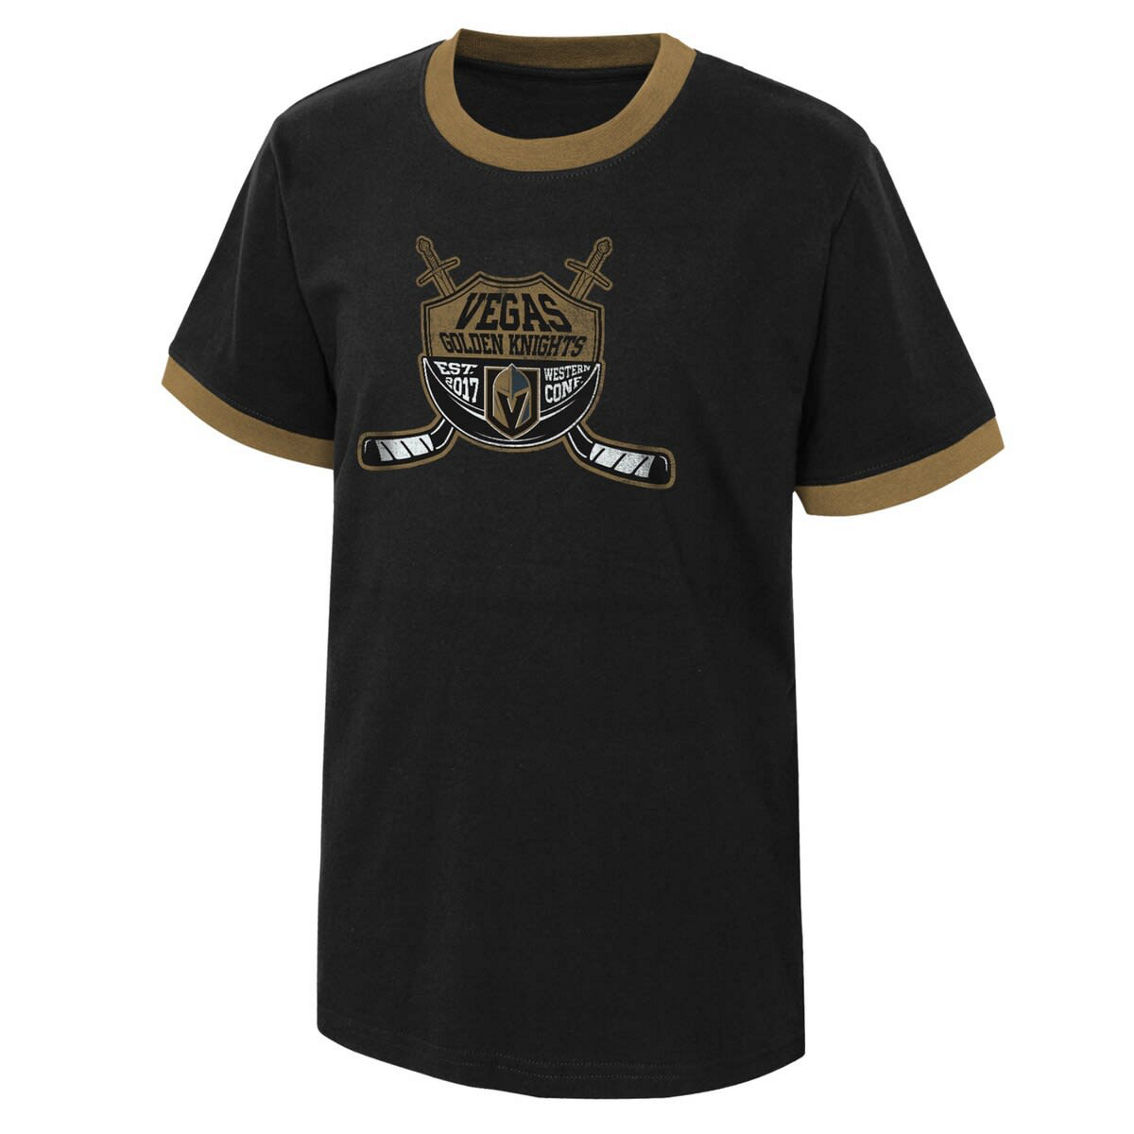 Outerstuff Youth Black Vegas Golden Knights Ice City T-Shirt - Image 3 of 4